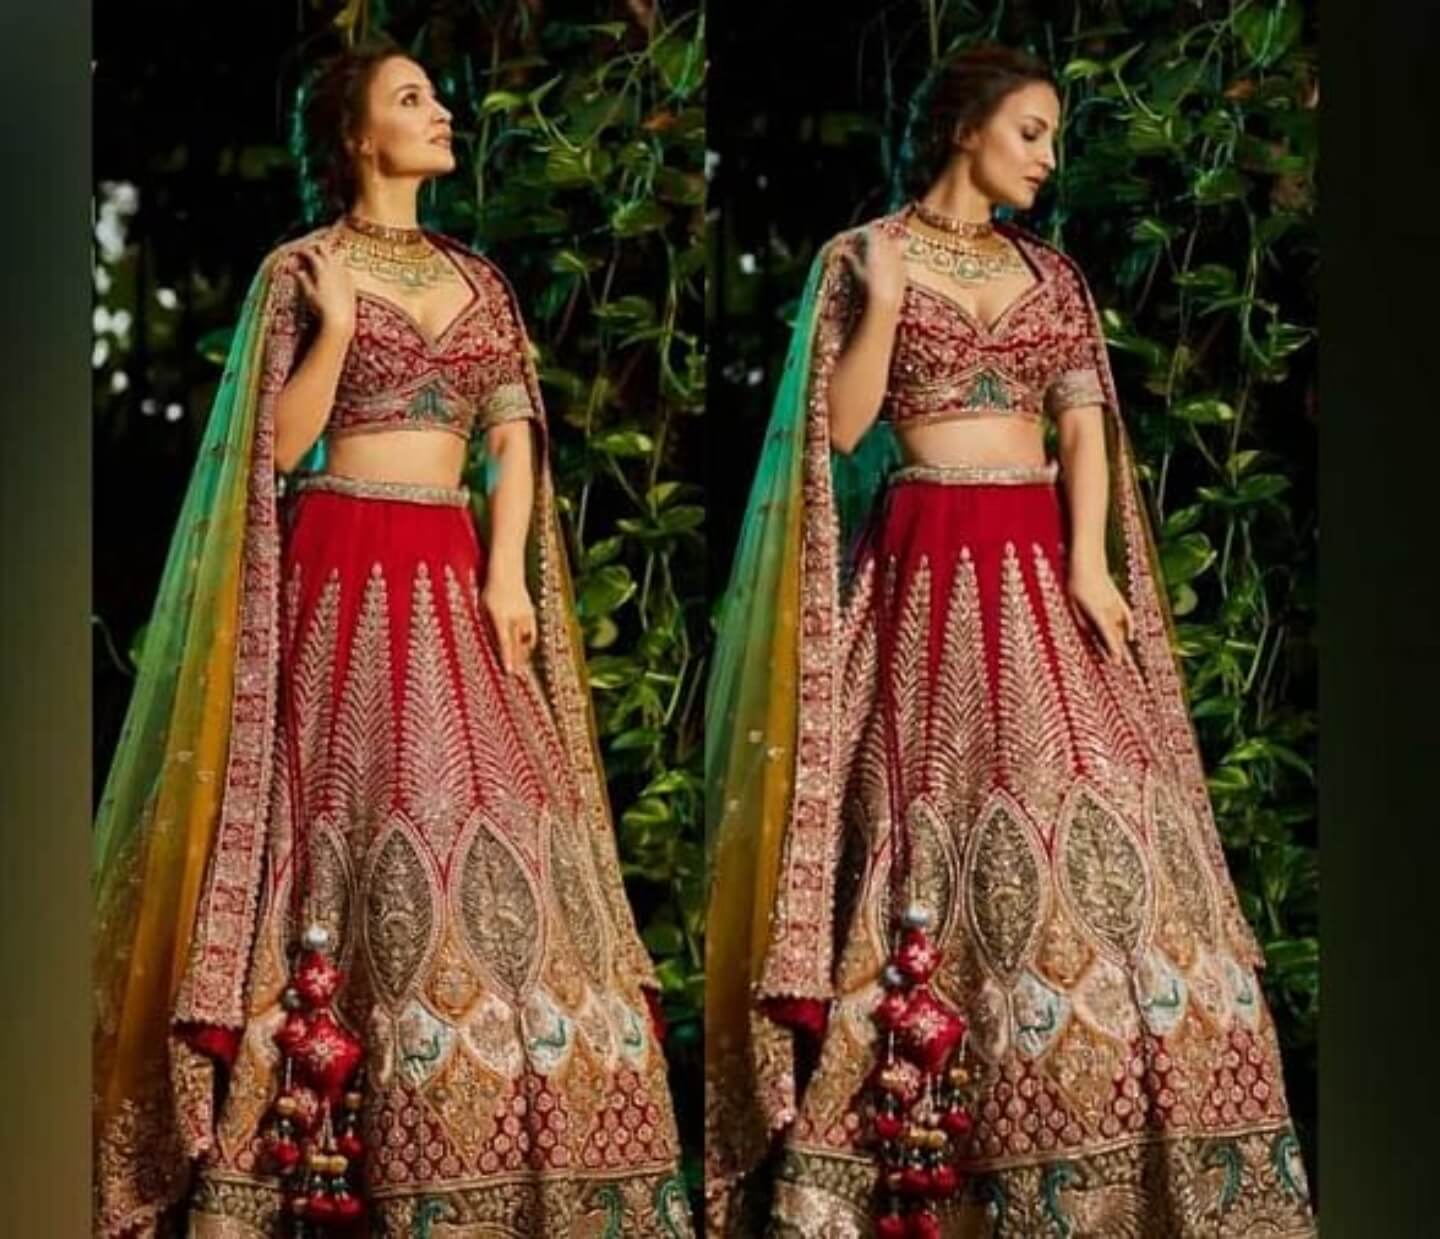 20+ Designs of Lehenga Choli That You Can Include In Your Navratri Shopping